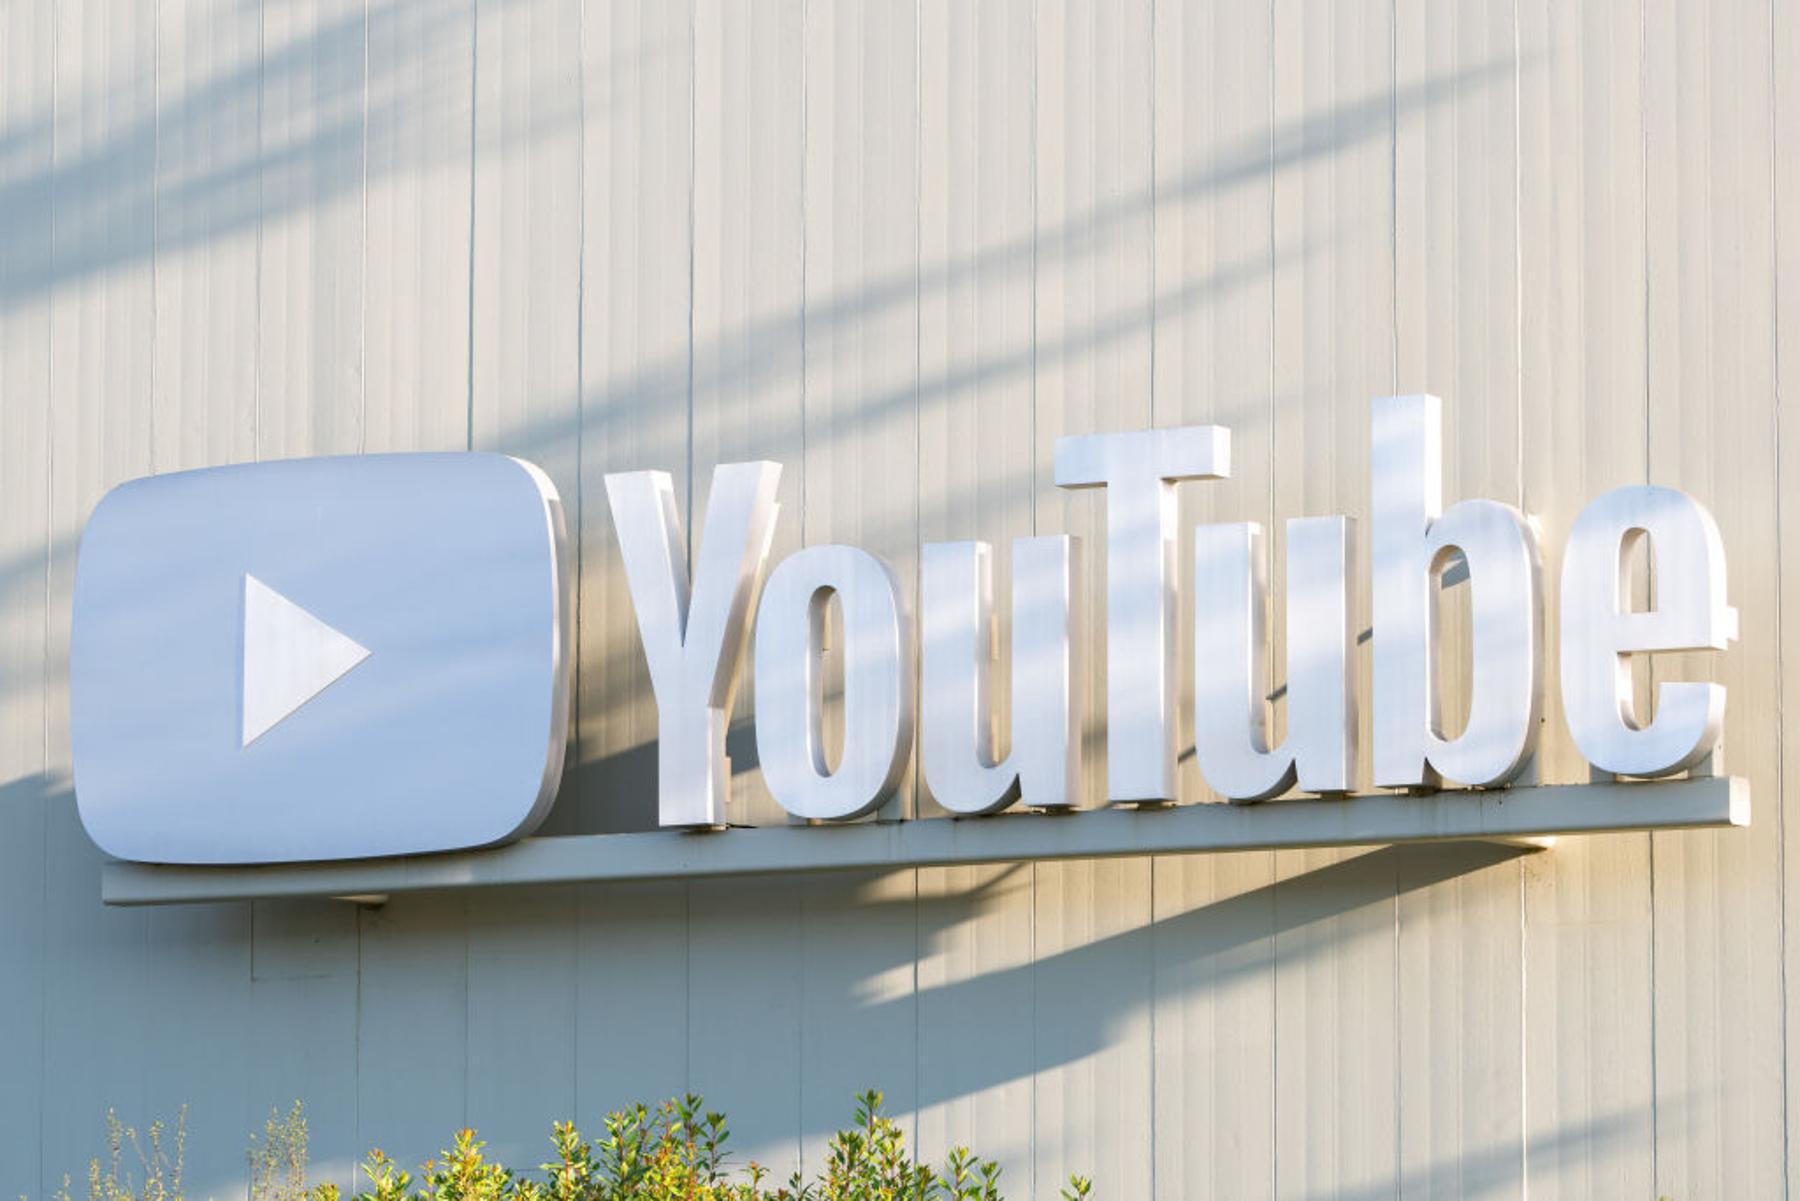 A large YouTube sign is pictured on a building in Playa Vista, California